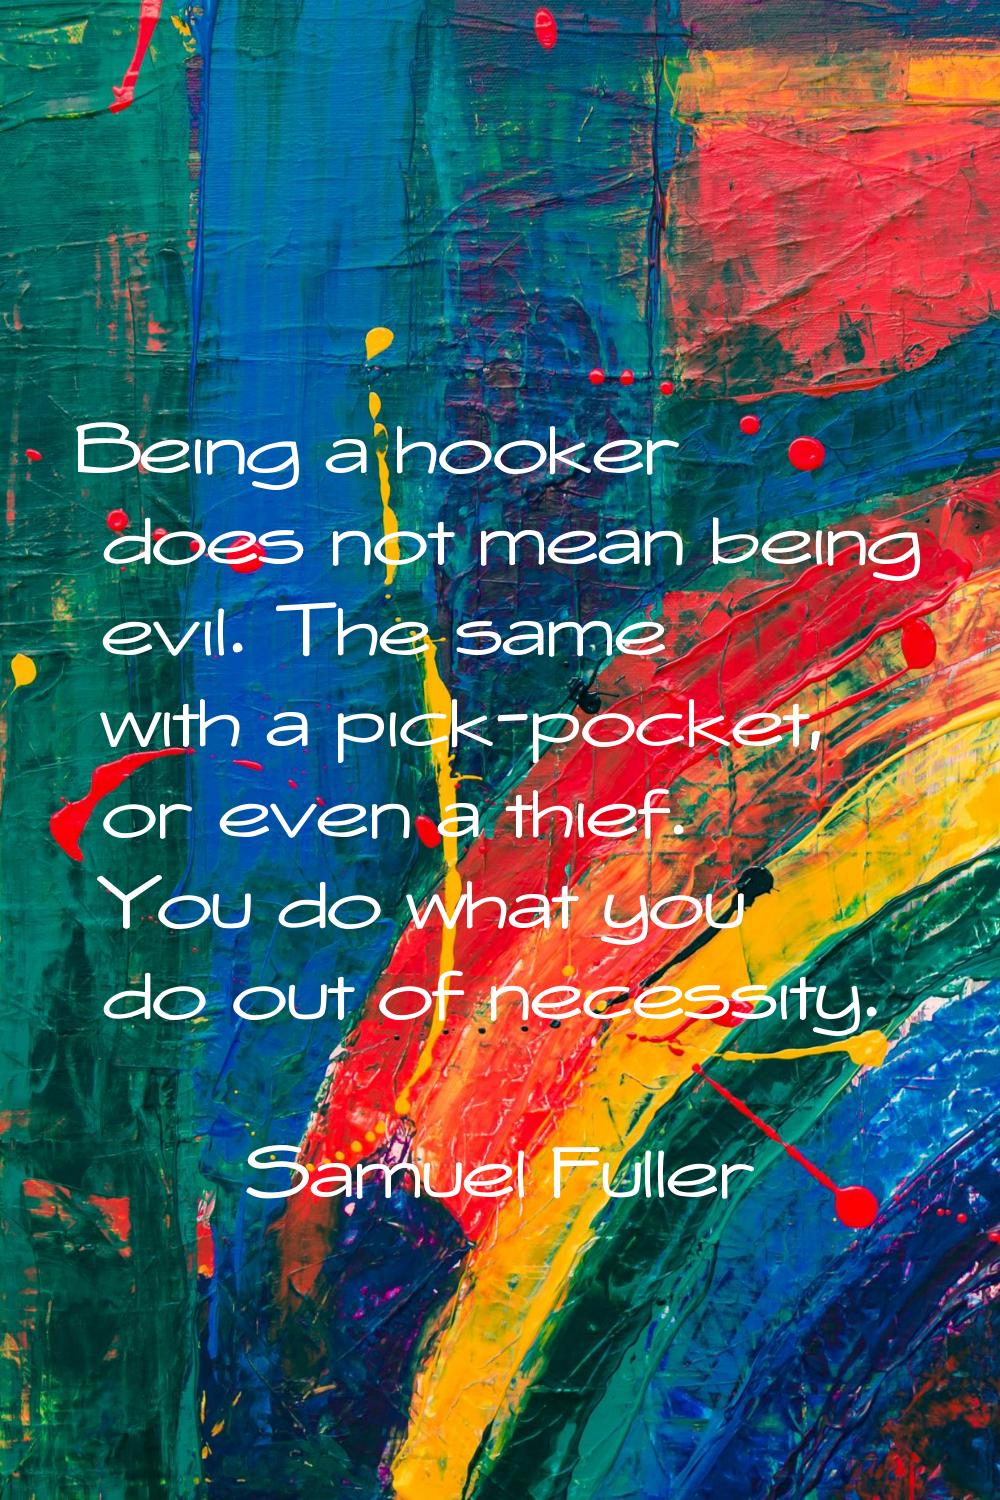 Being a hooker does not mean being evil. The same with a pick-pocket, or even a thief. You do what 